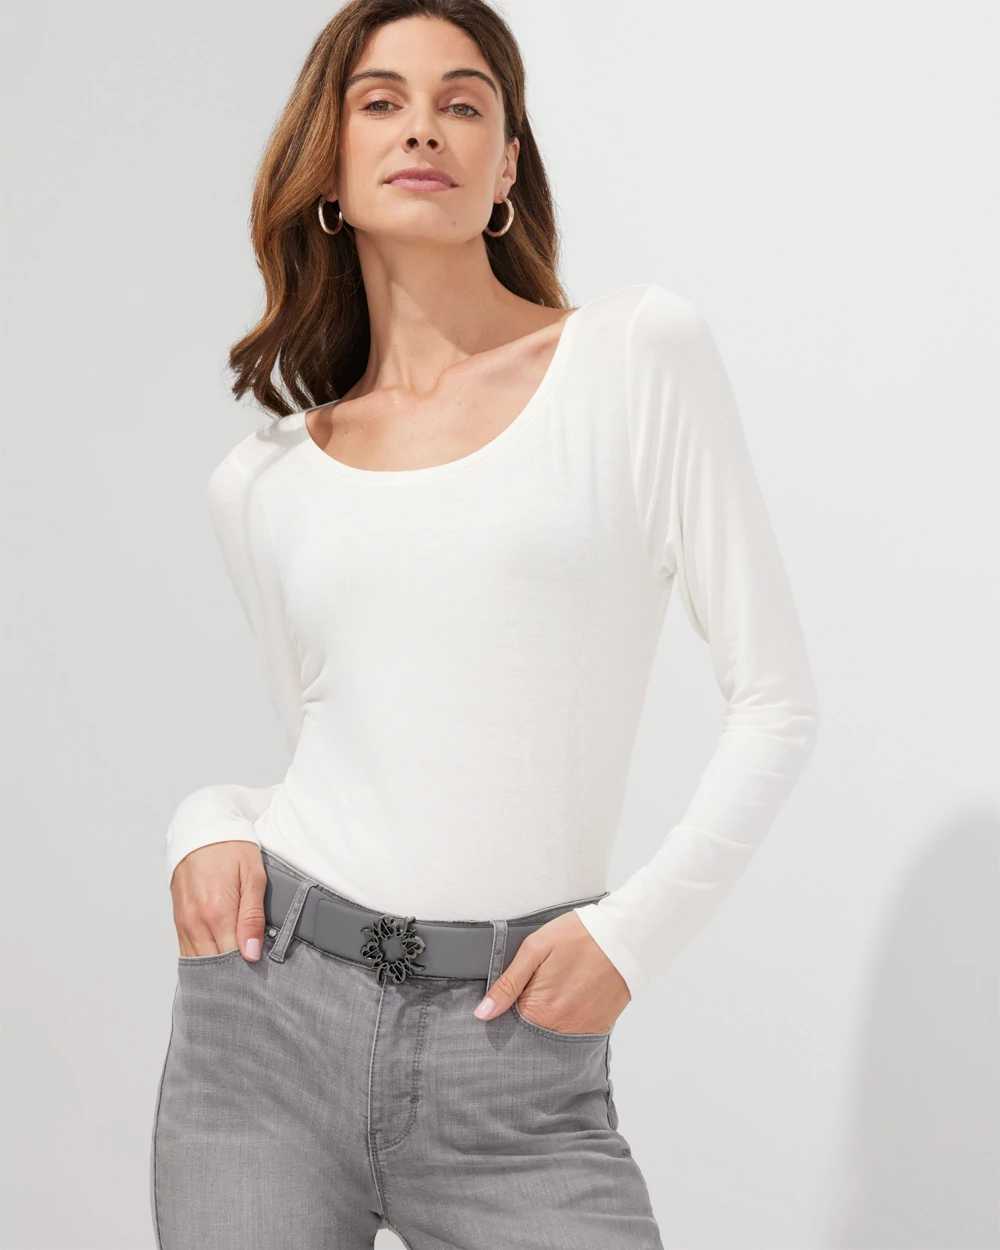 Outlet WHBM Long-Sleeve Scoop-Neck Tee